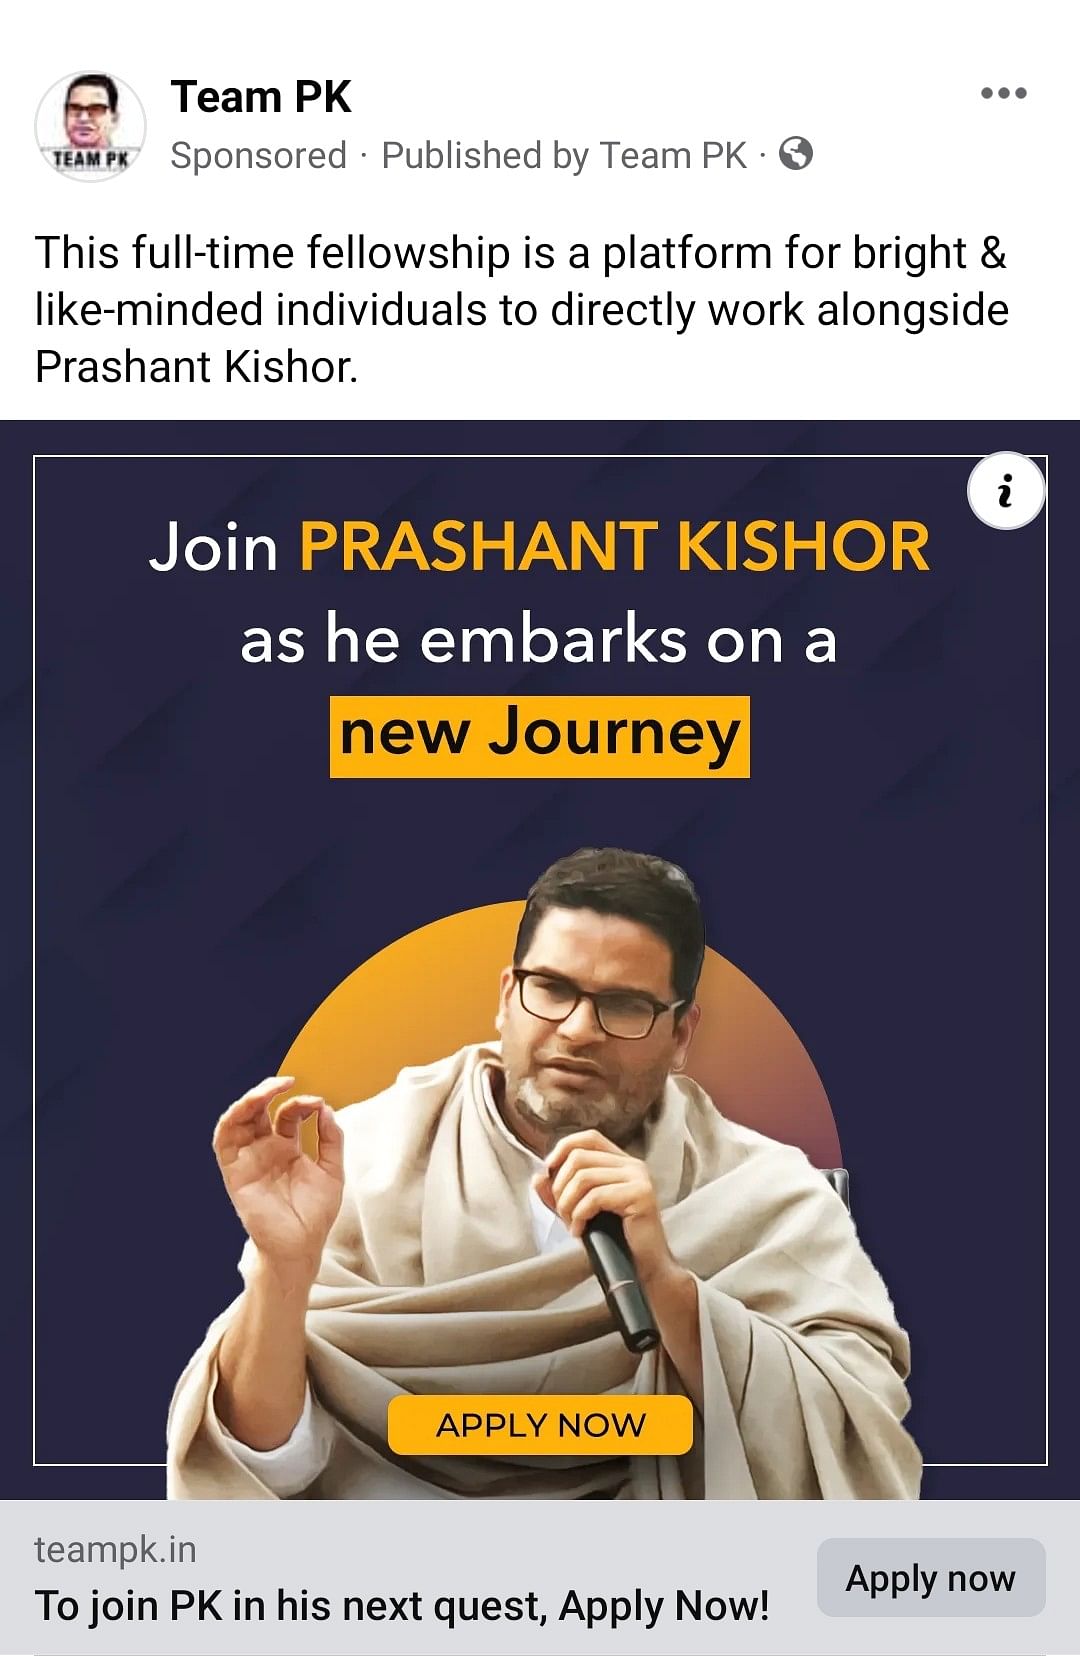 What was the deal-breaker between the Congress and Prashant Kishor? Will PK continue with his political plans?